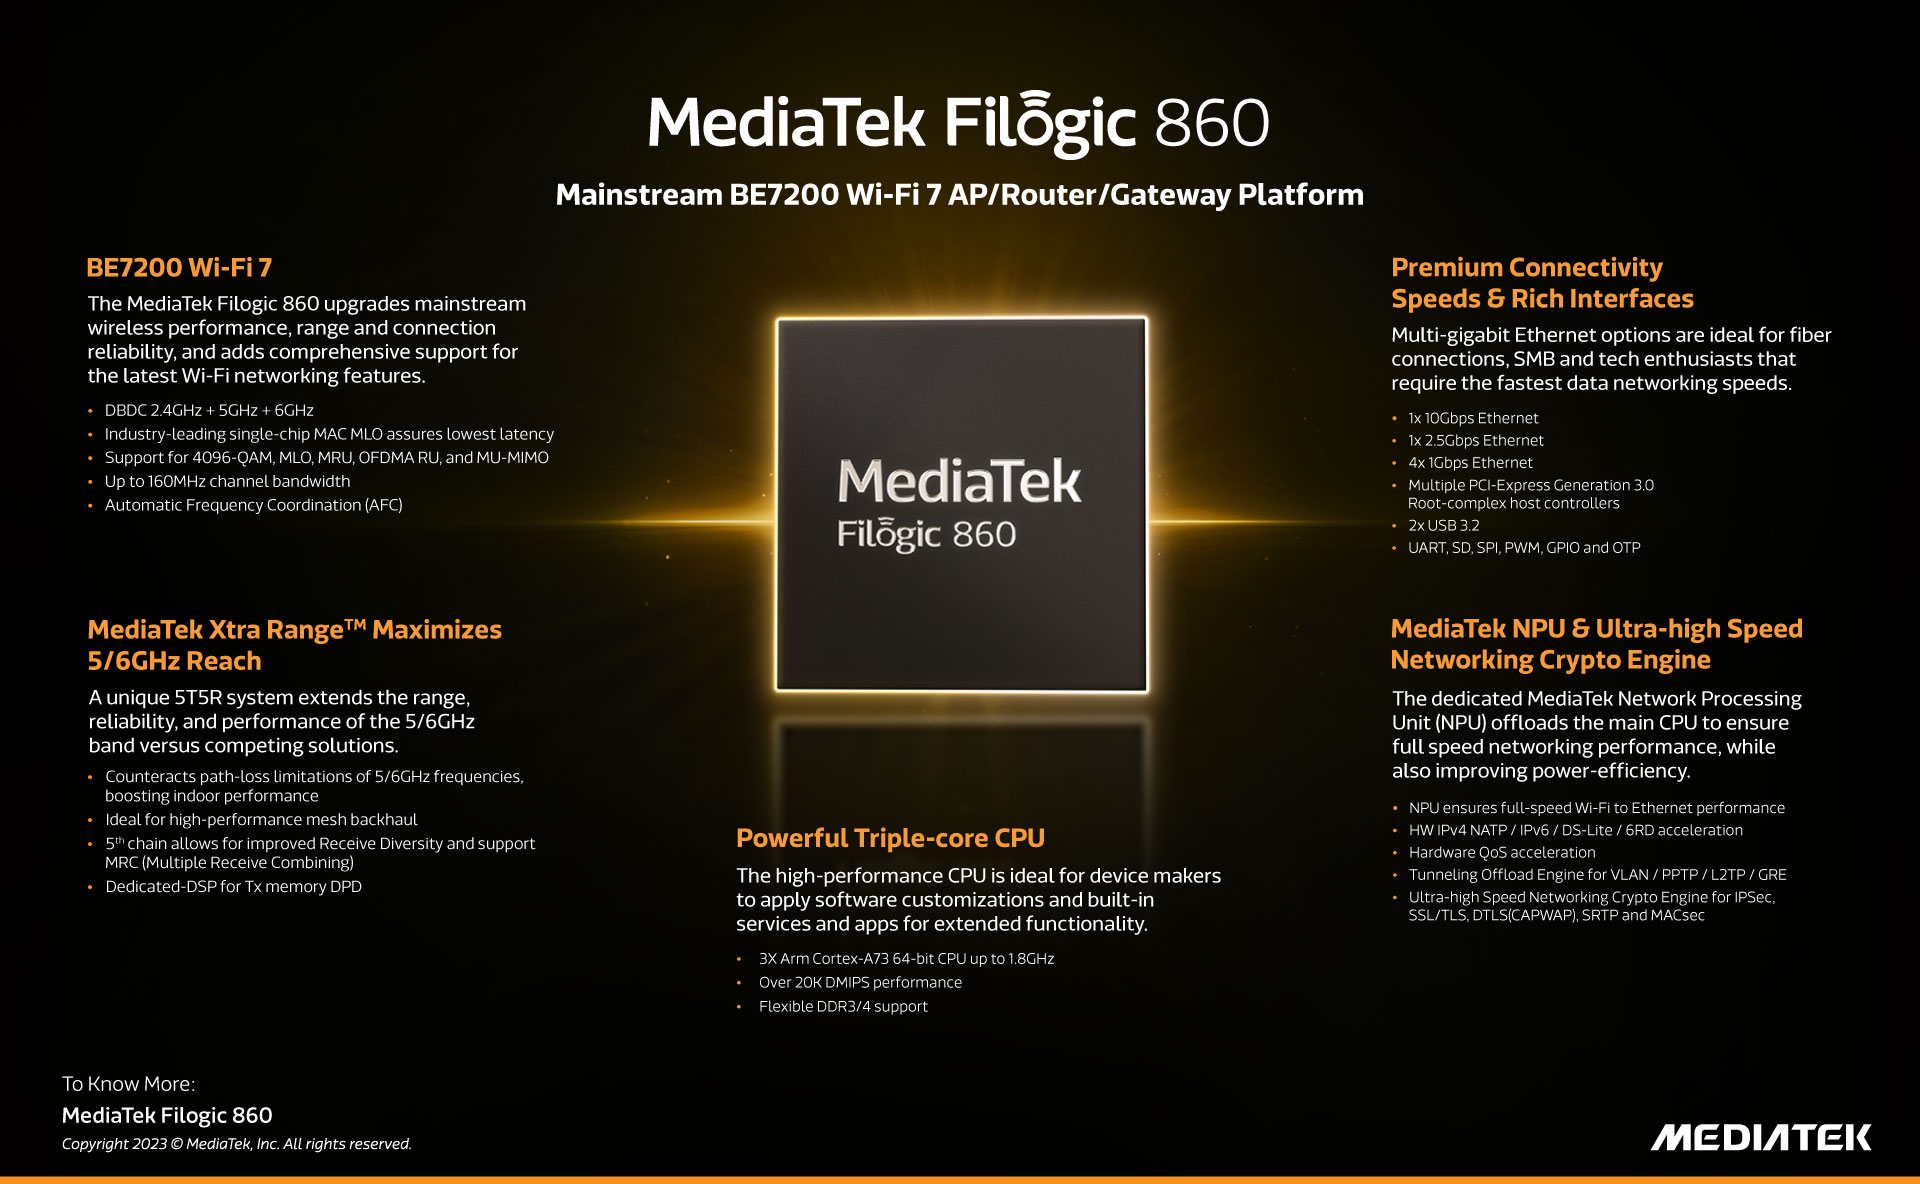 Key features of the Filogic 860 include